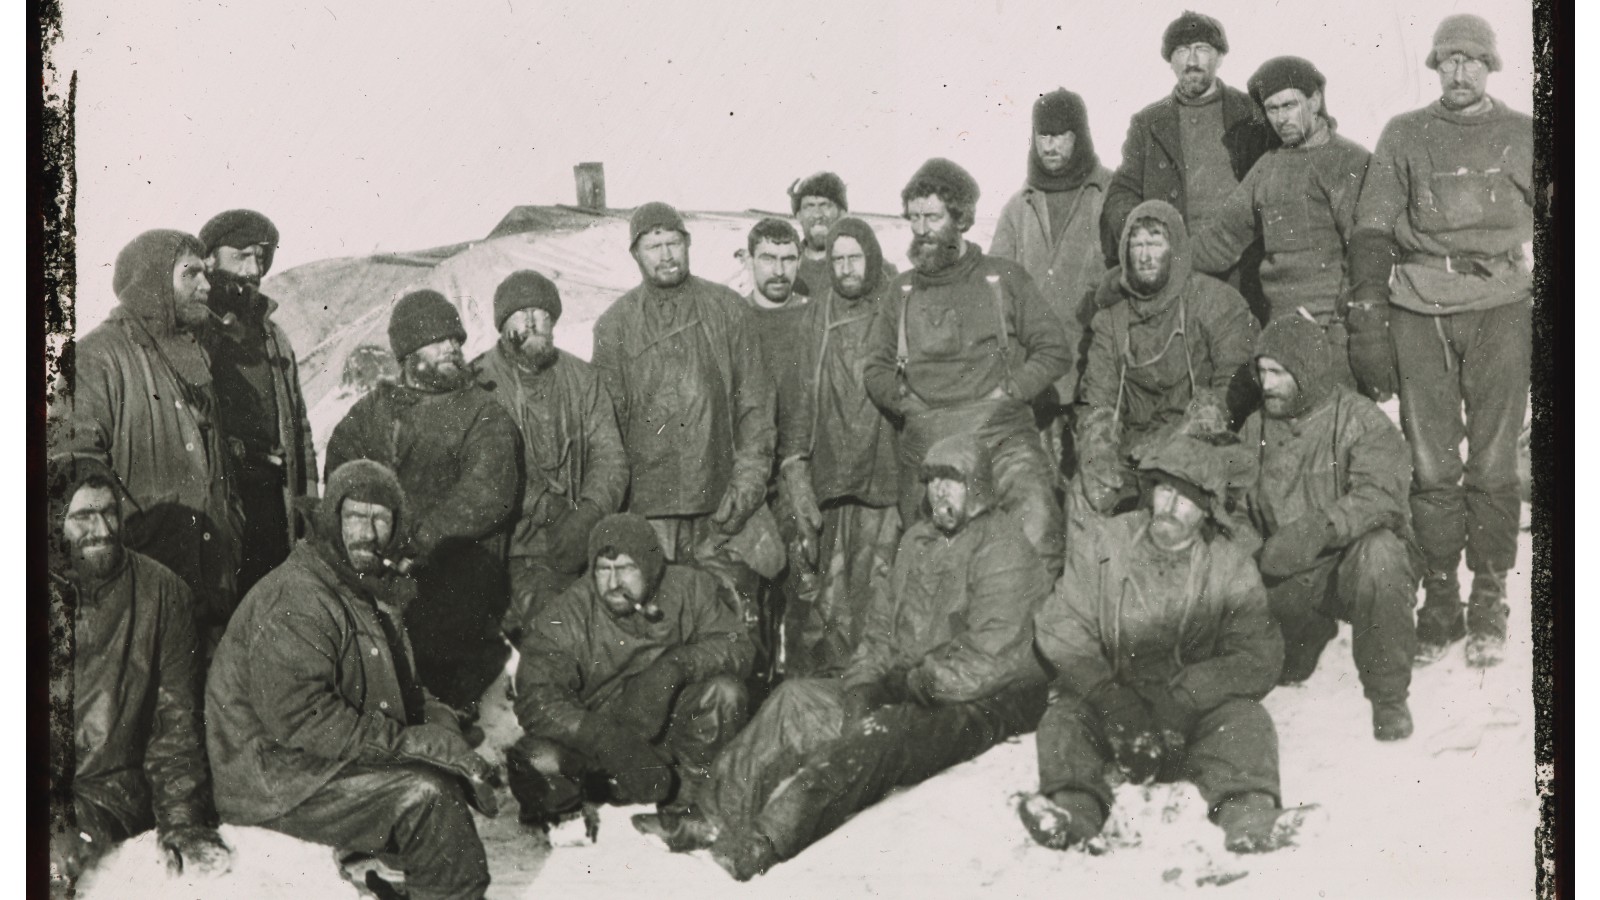 The crew of ‘Endurance’ pictured on Elephant Island awaiting rescue by Shackleton, August 1916